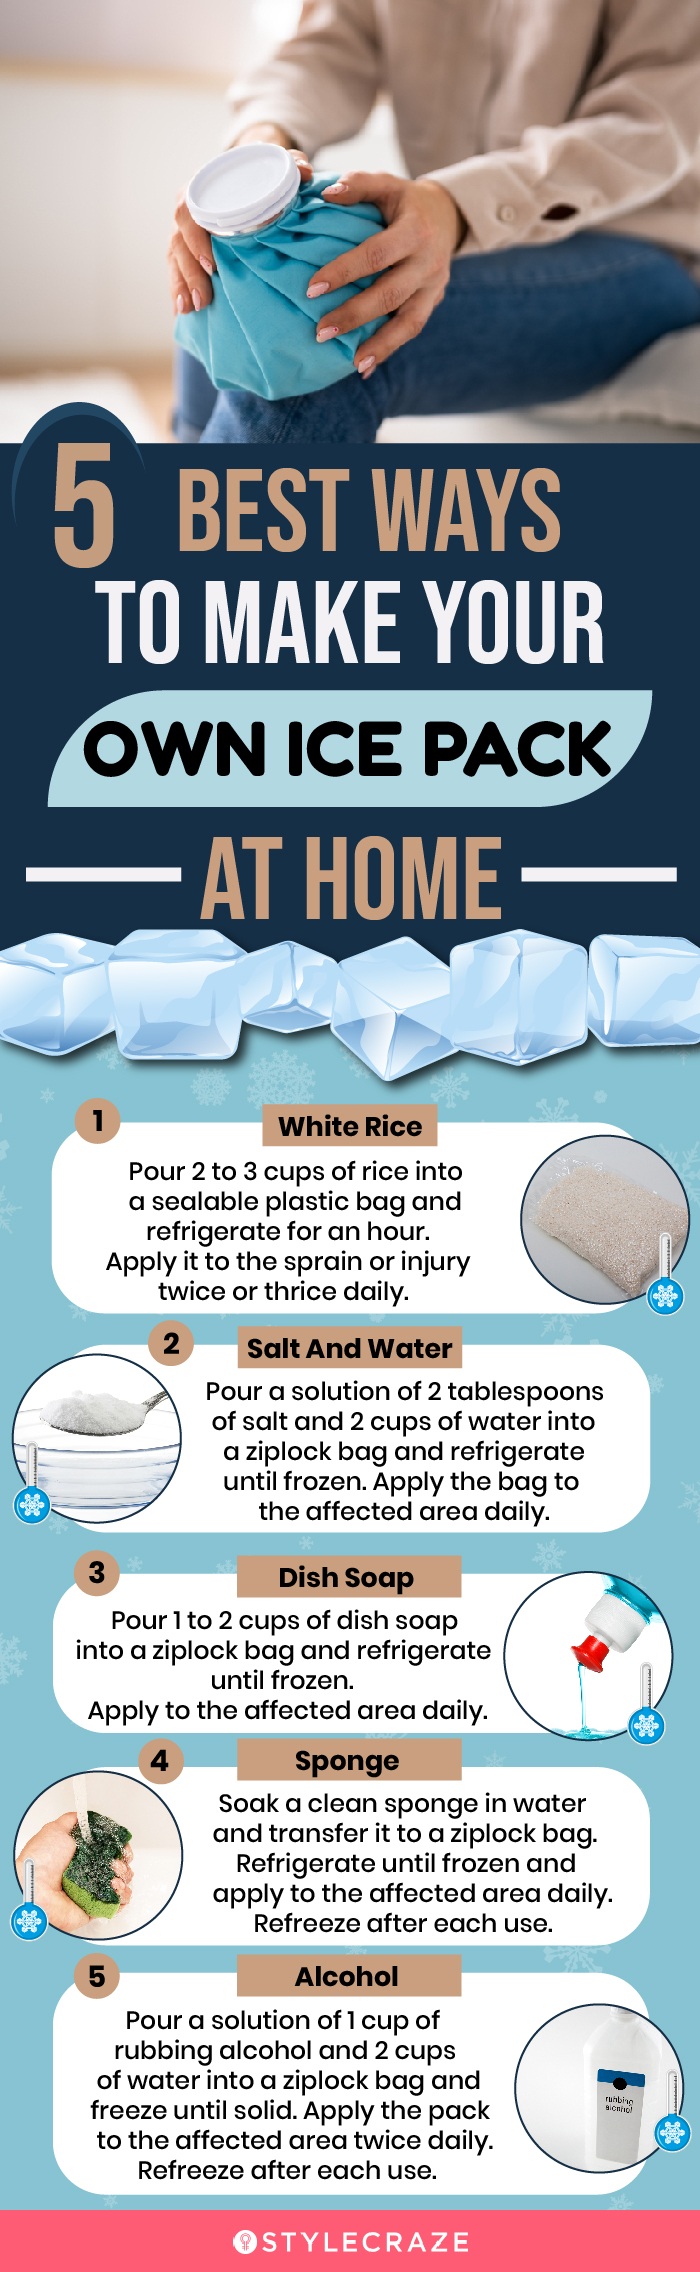 5 best ways to make your own ice pack at home (infographic)